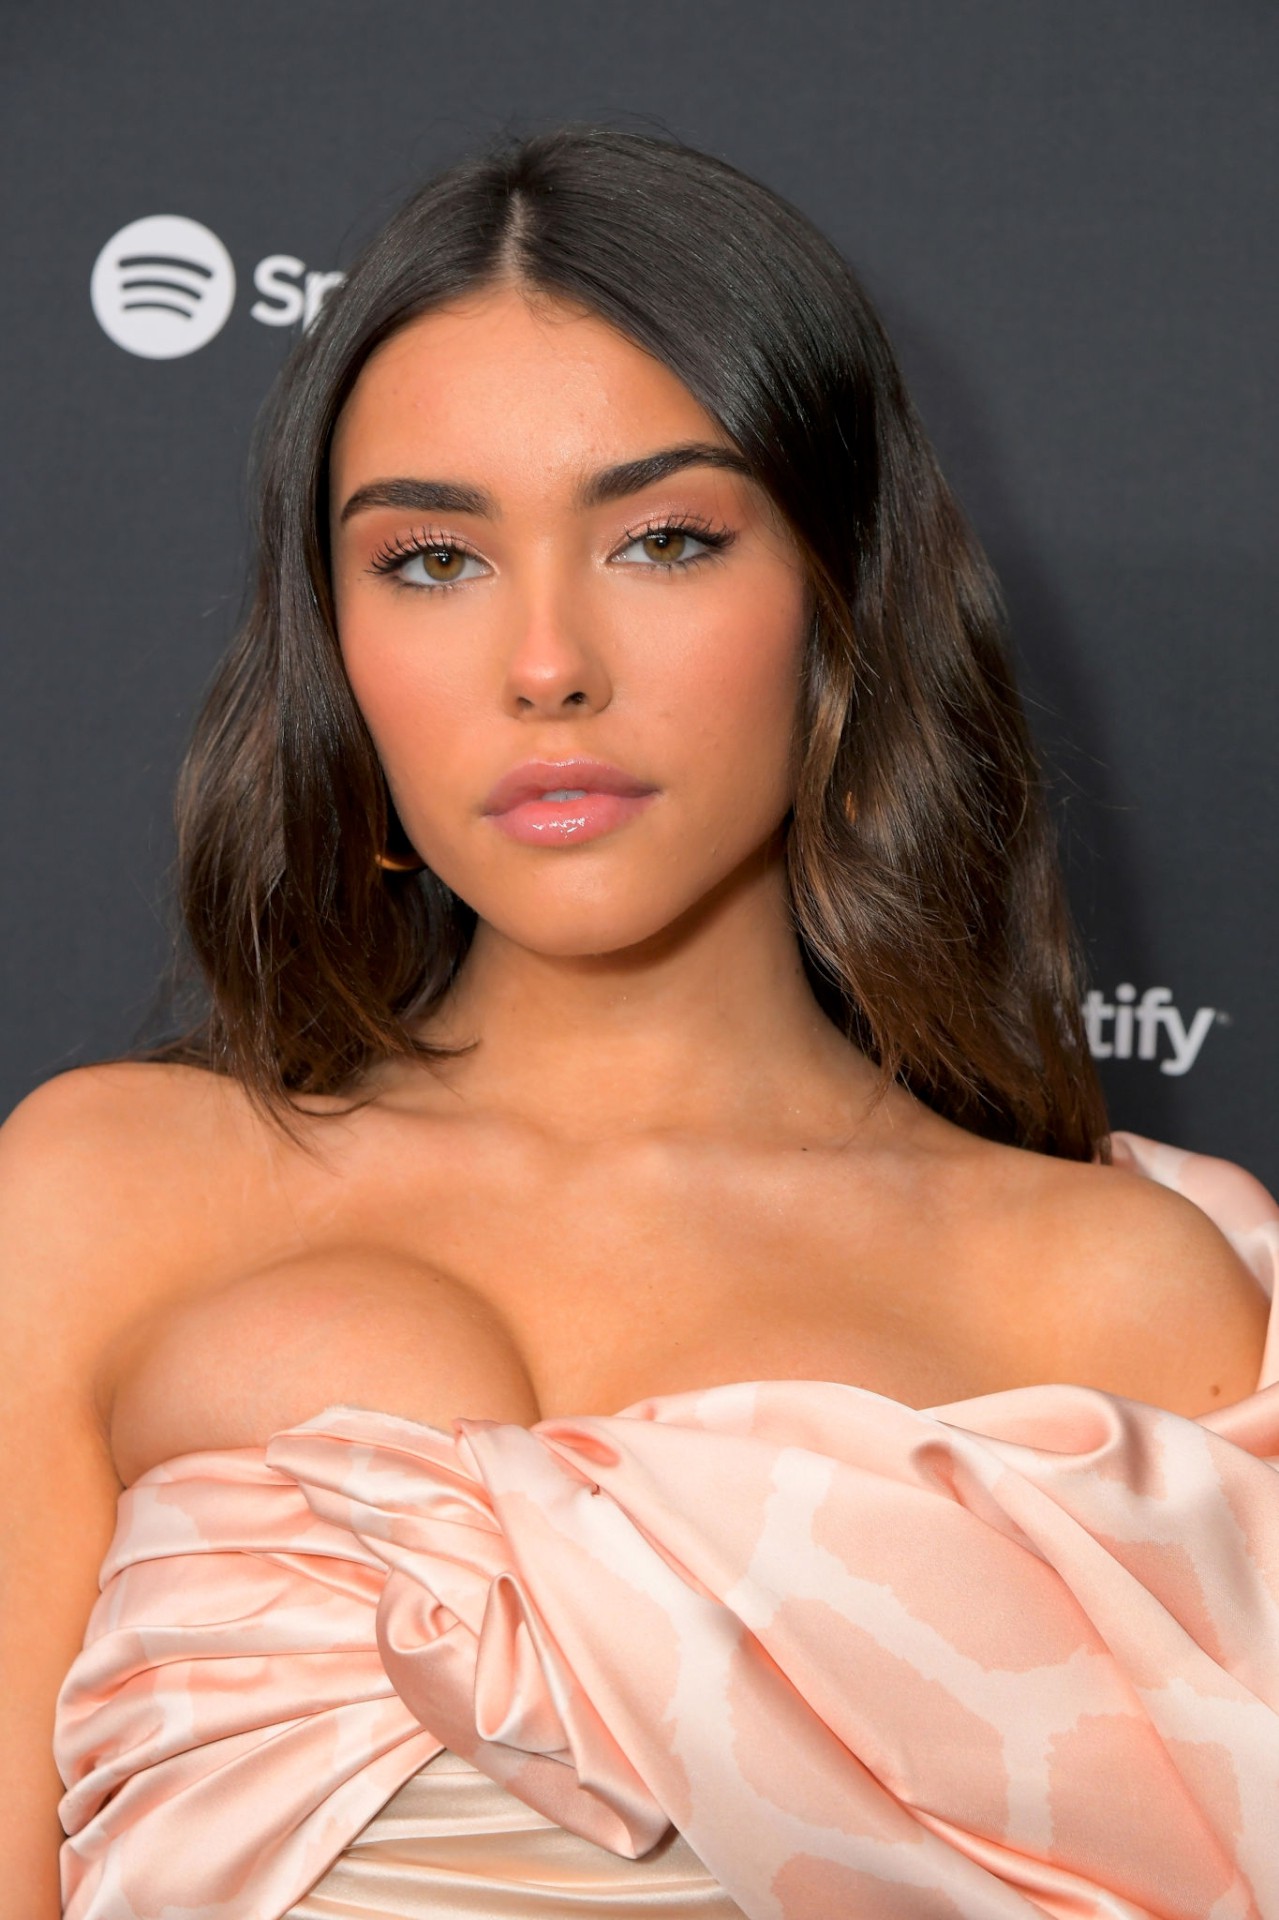 Madison Beer - Sexy Boobs and Legs at Spotify "Best New Artist" P...